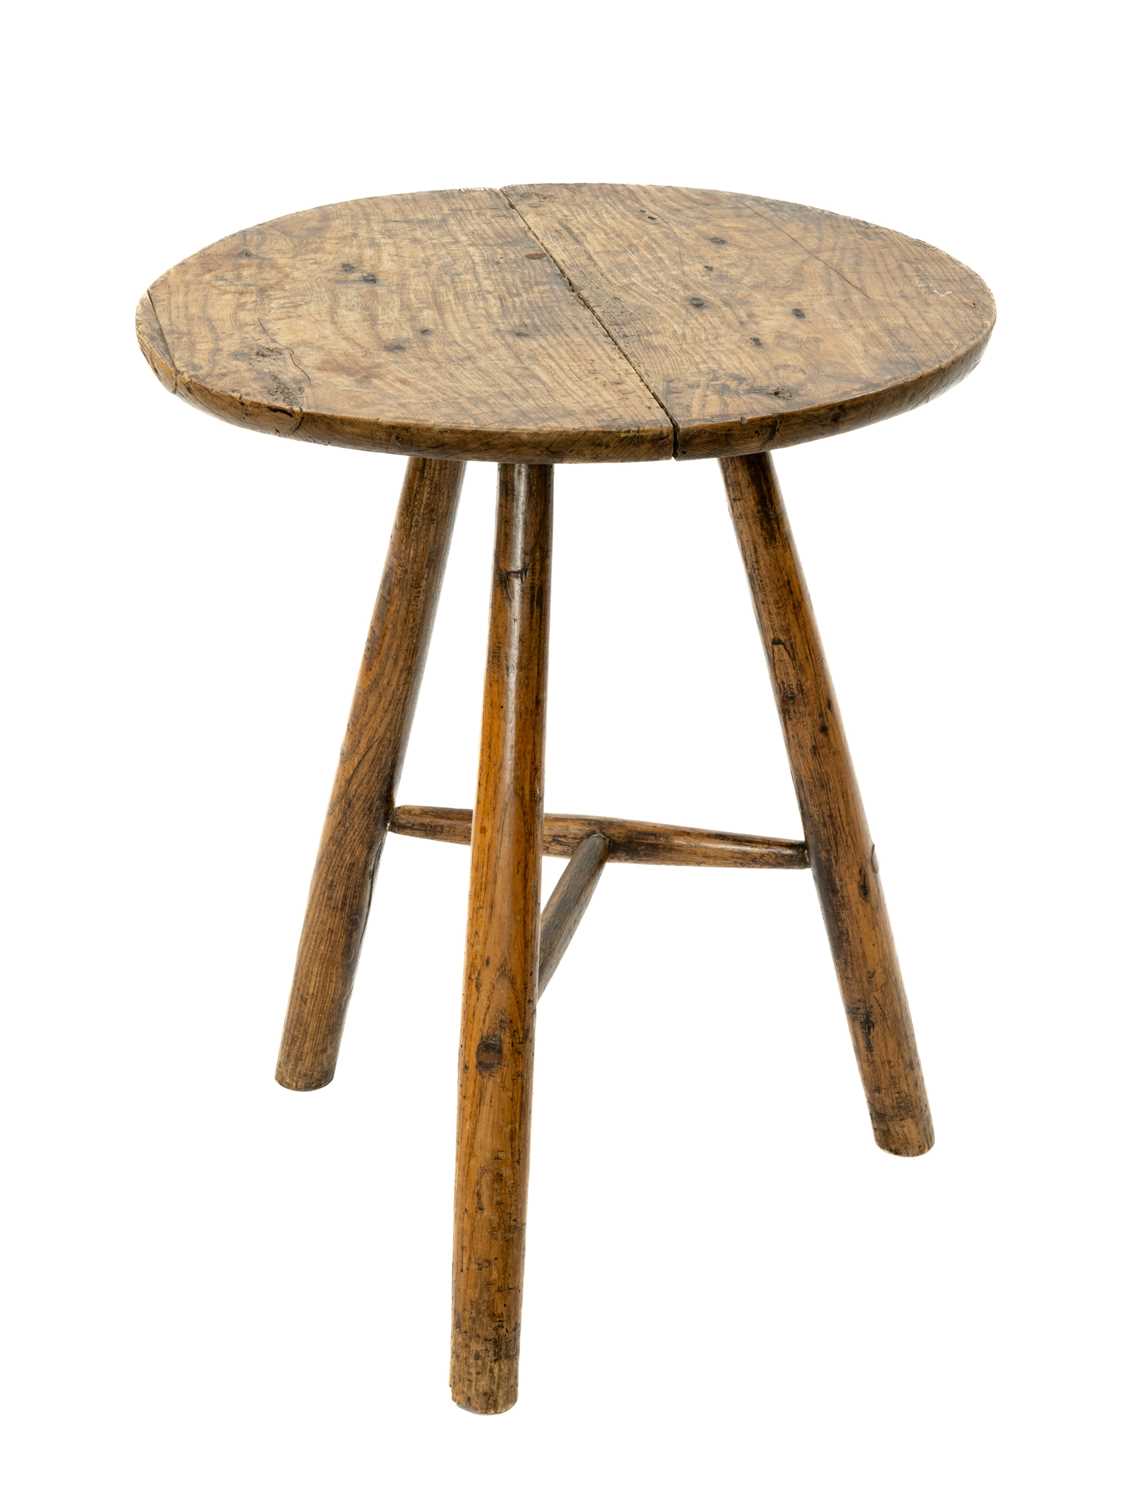 OAK AND ASH CRICKET TABLE, late 18th C., believed Welsh, oak and ash, circular top raised on three - Image 2 of 2